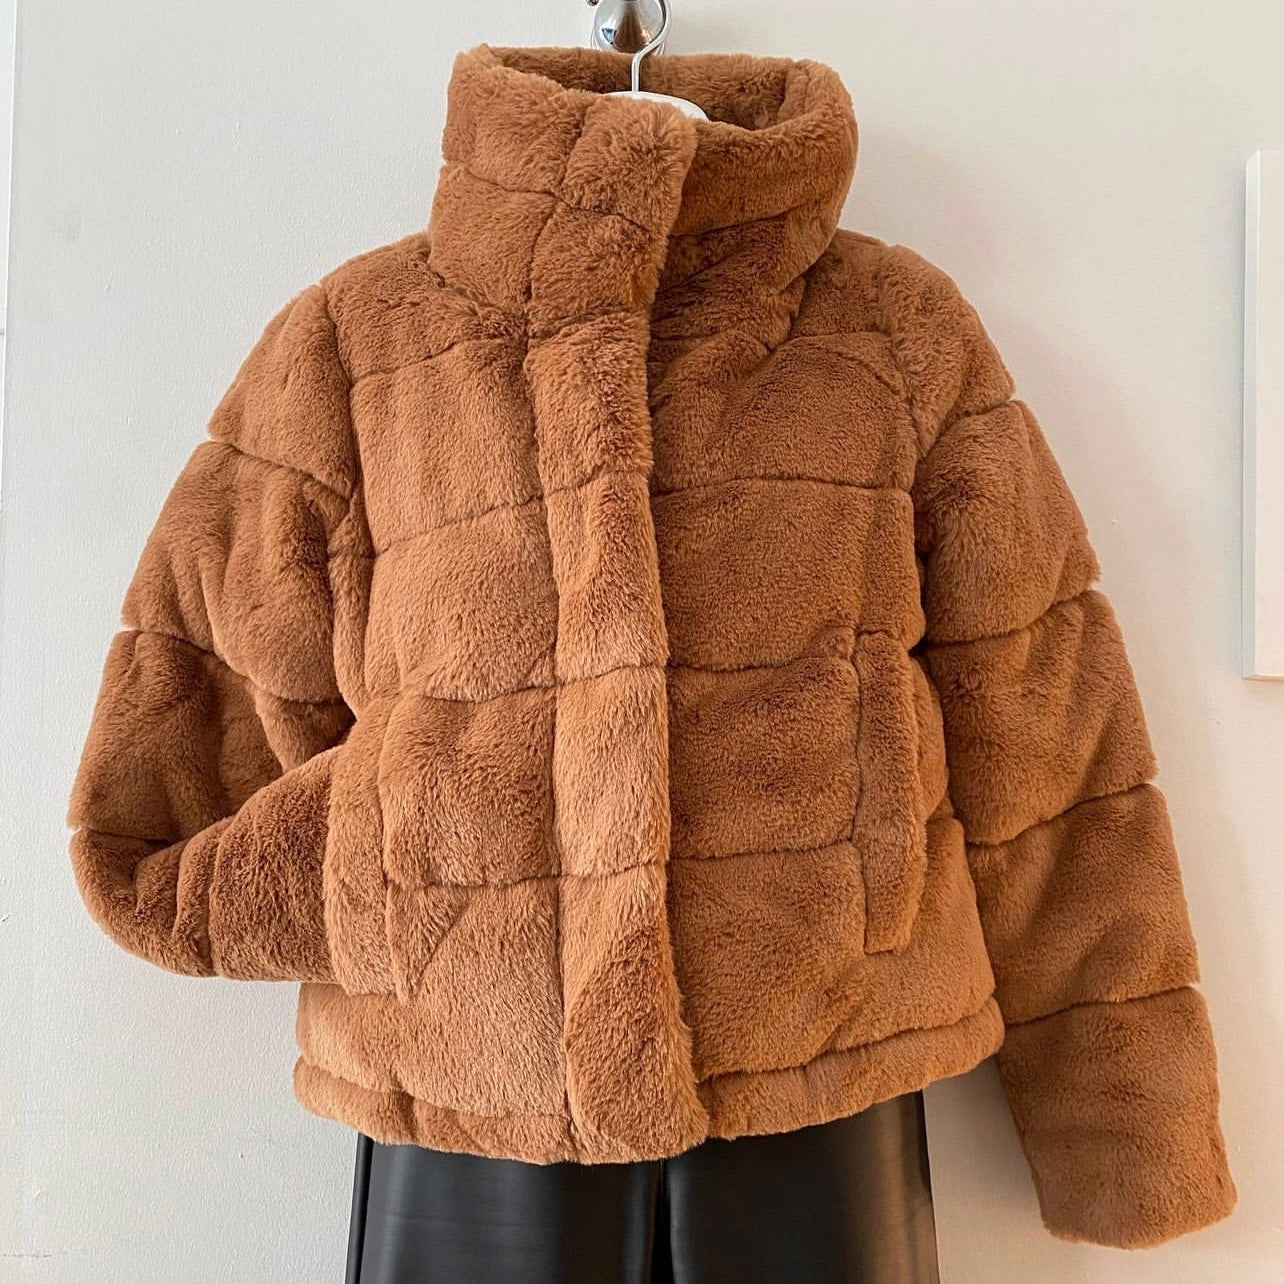 Coats – Found Consignment